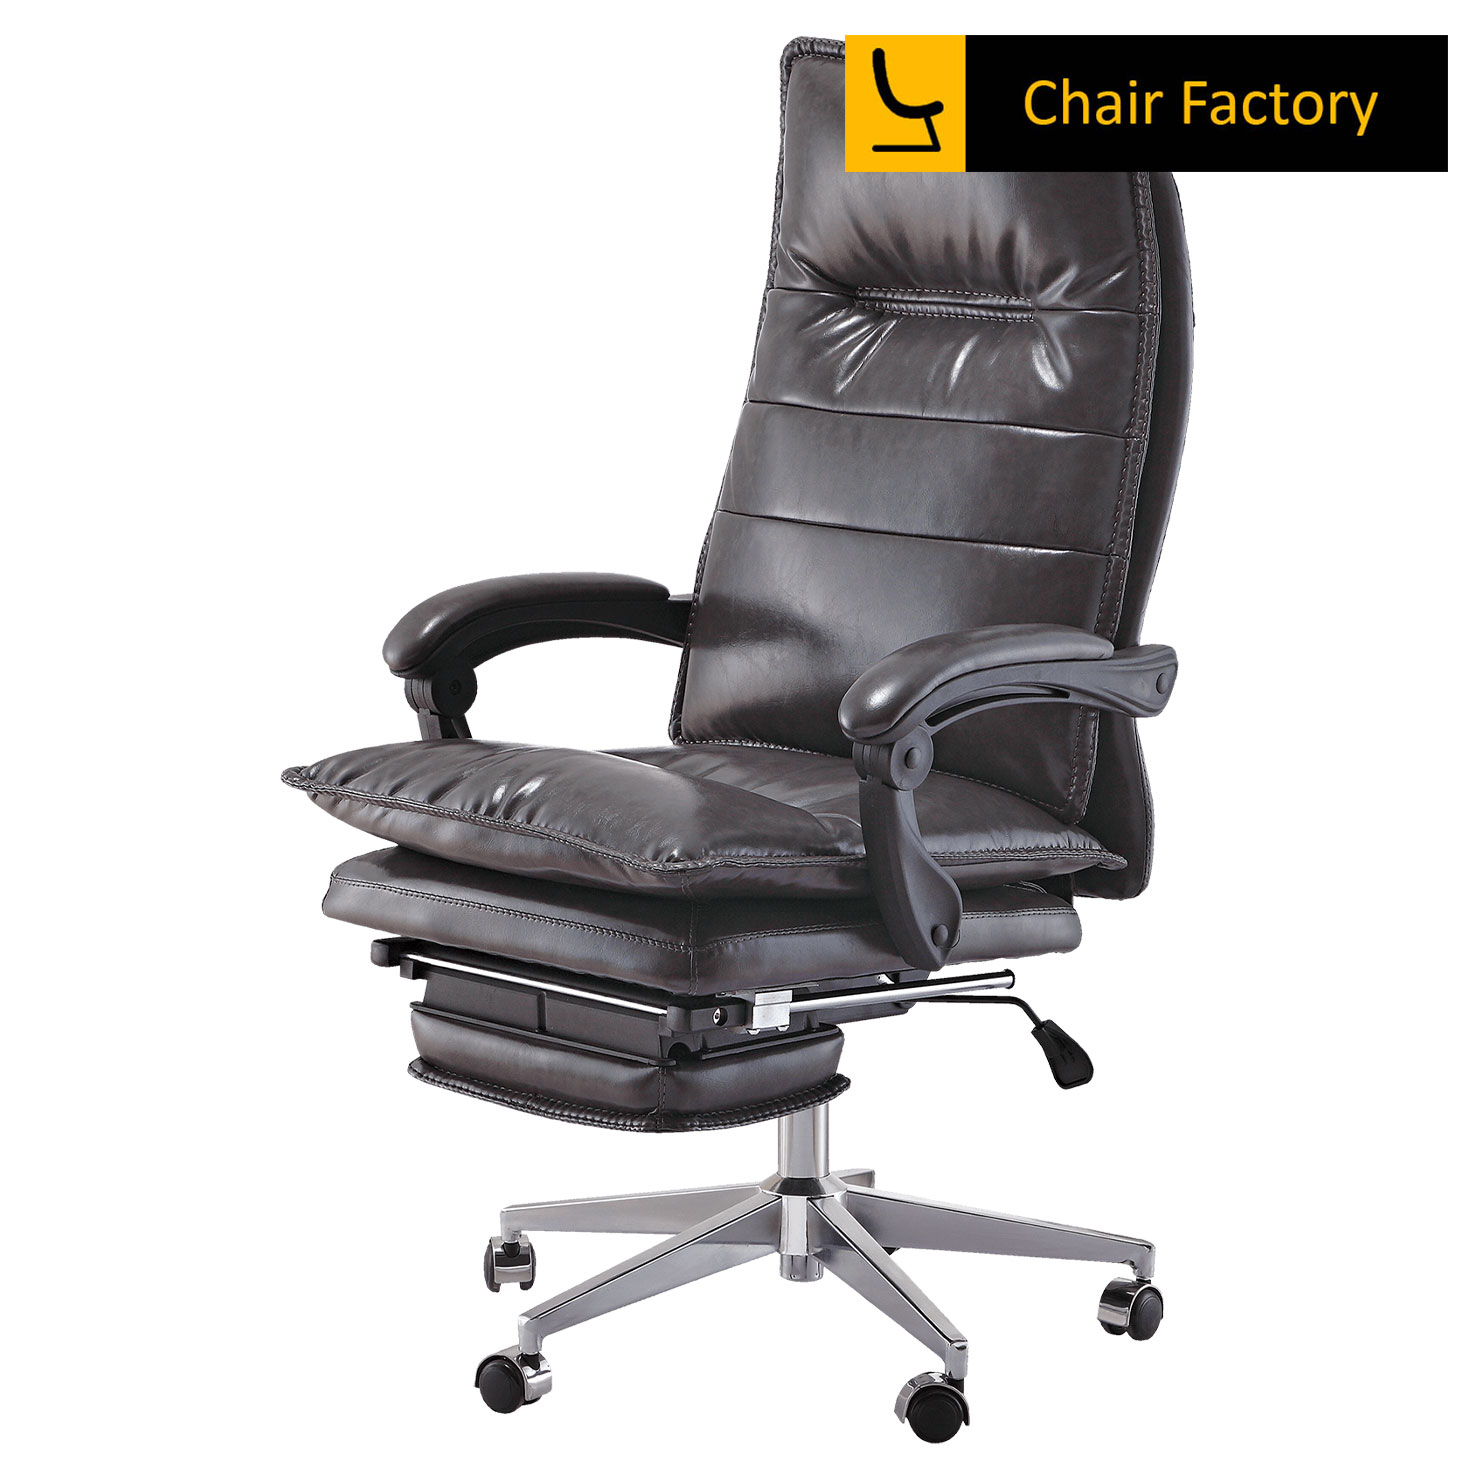 Eclipse 100% Genuine Leather Chair With Footrest